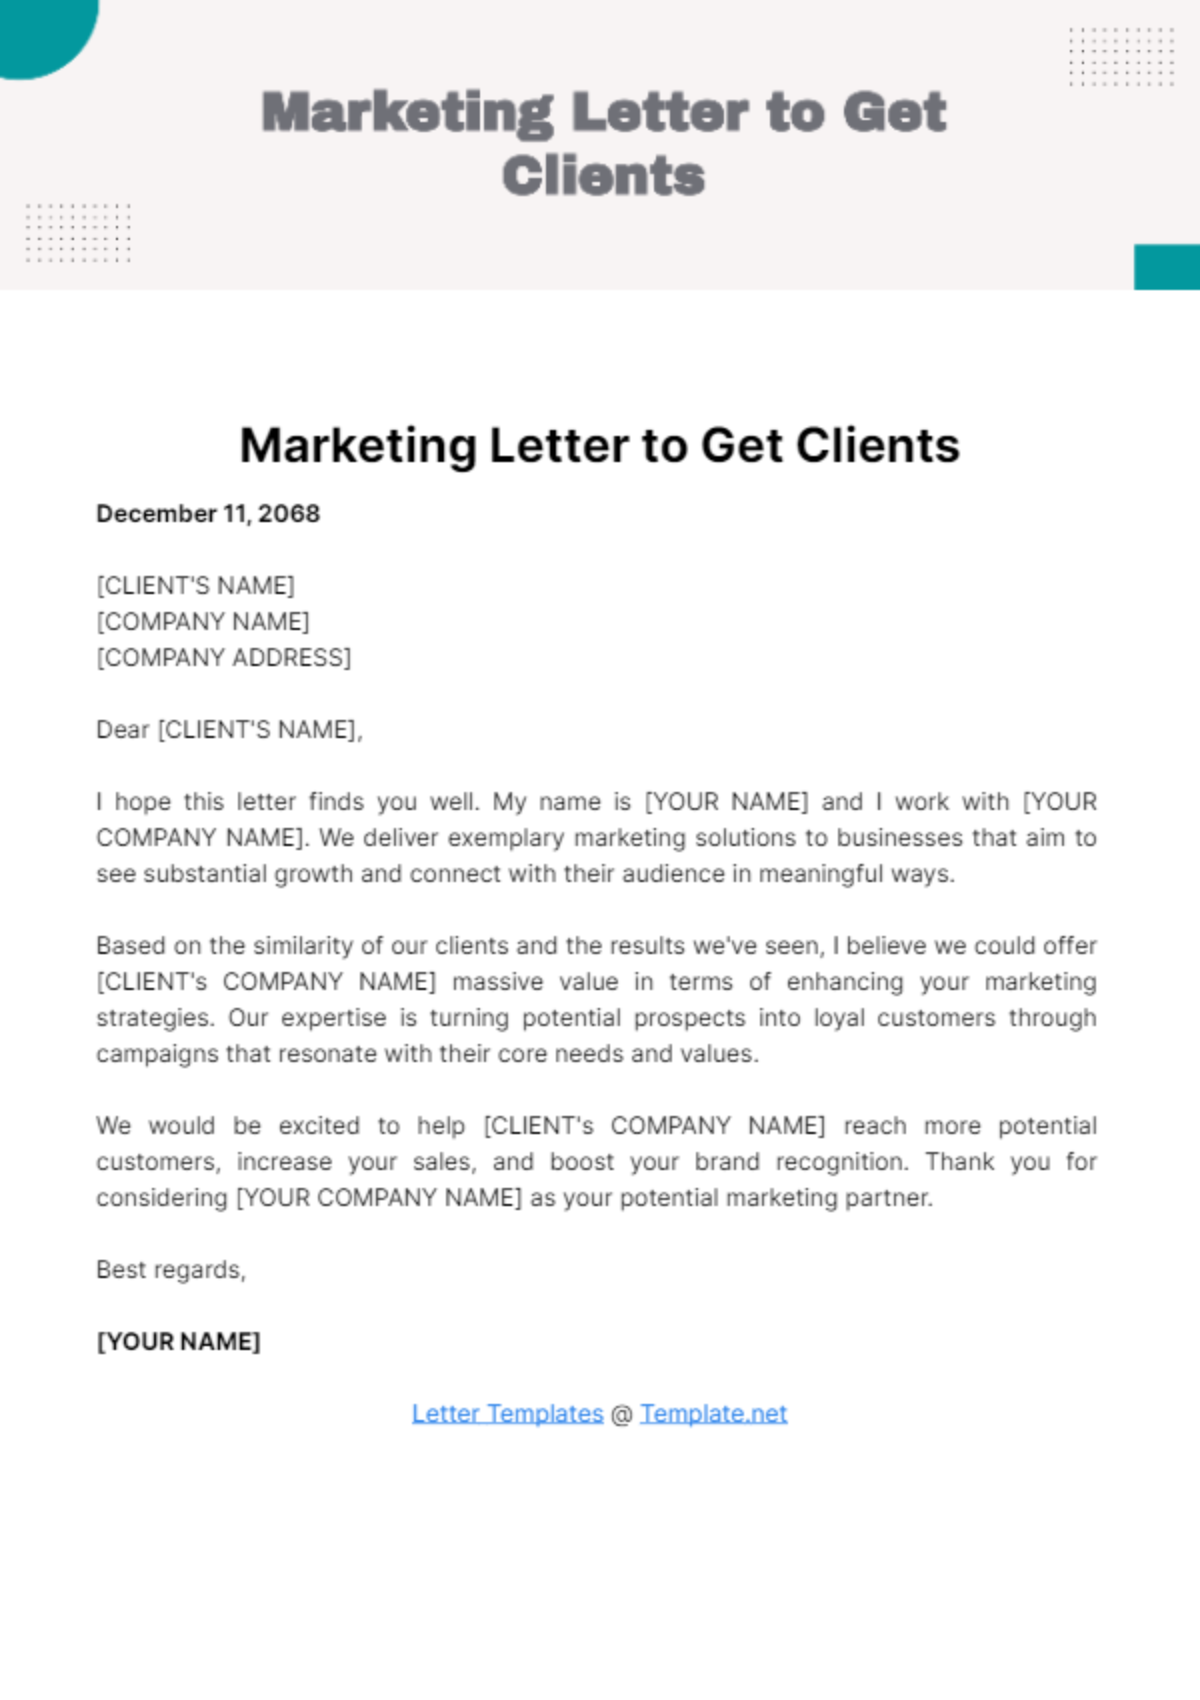 Free Marketing Letter to Get Clients Template